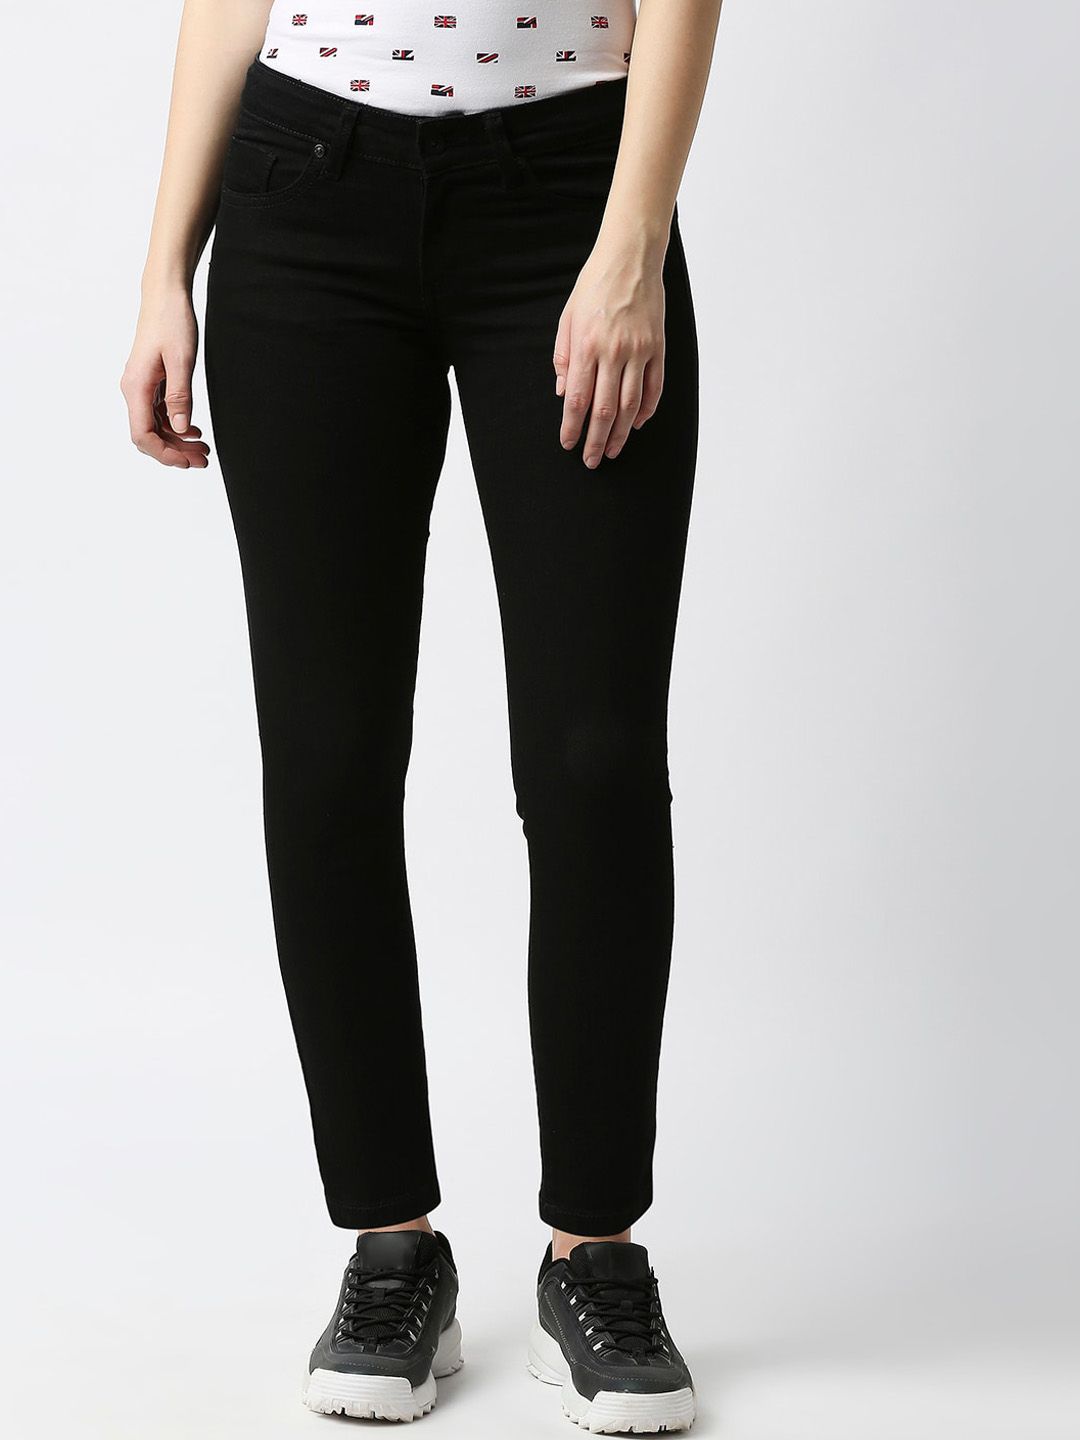 Pepe Jeans Women Black Skinny Fit Jeans Price in India